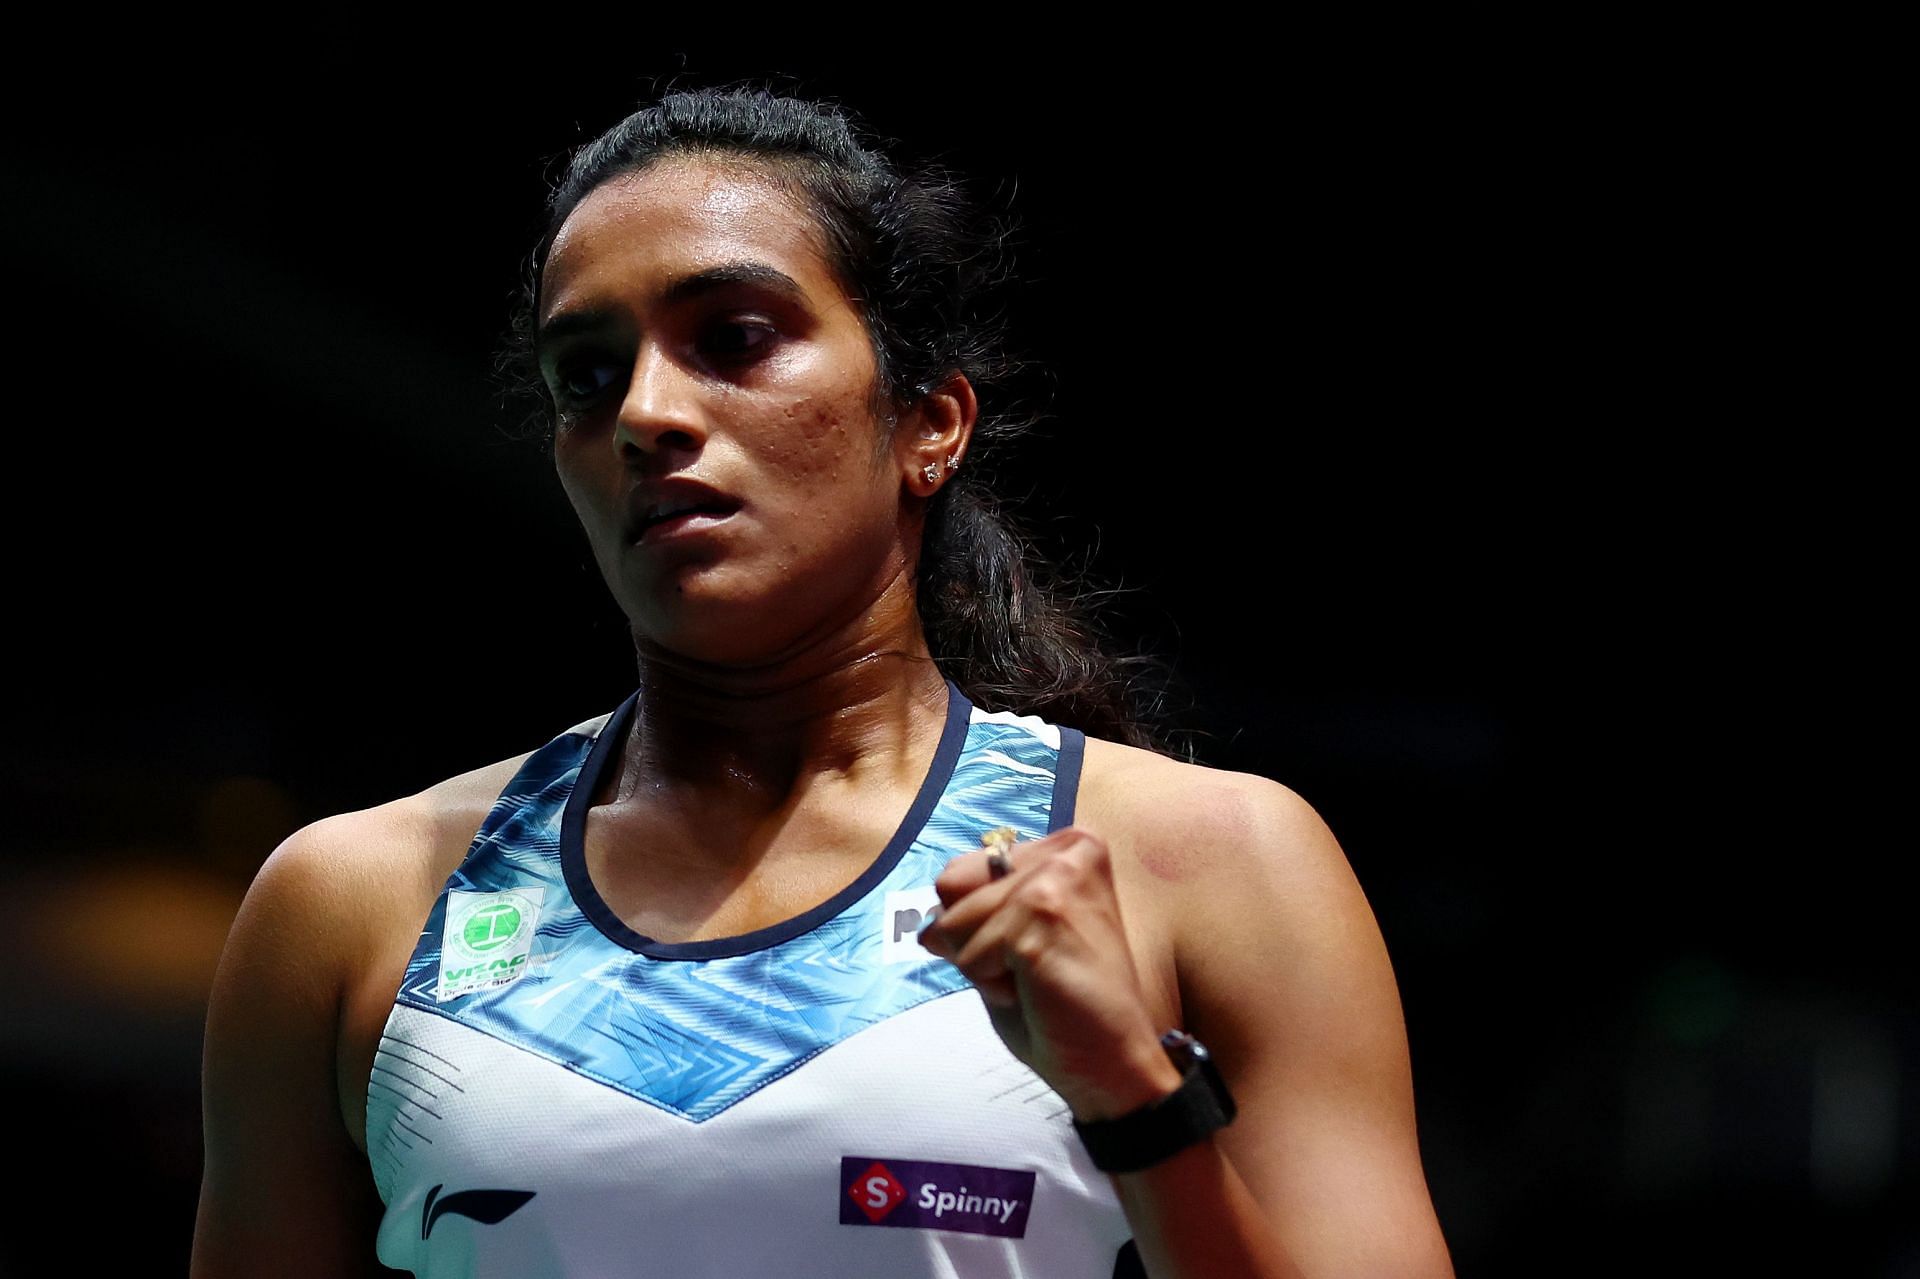 Sindhu fistpumps during her semifinal match at the 2022 Singapore Open (Image courtesy: Getty Images)